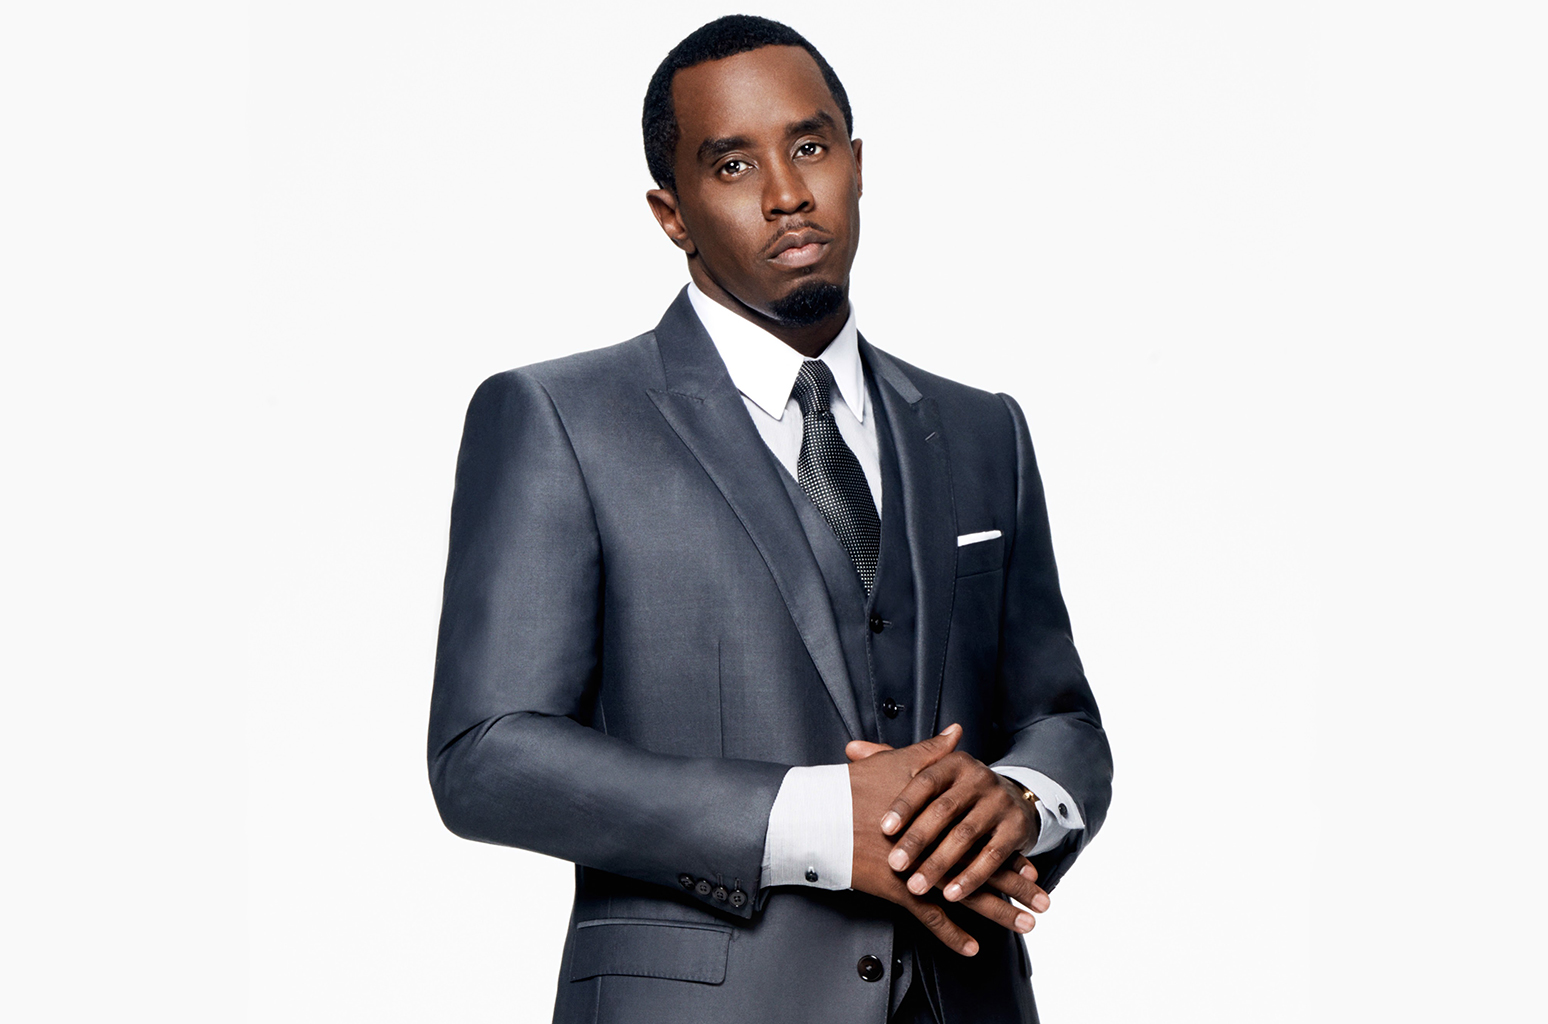 Diddy on his way to becoming hip hop’s first billionaire, with Jay-Z not far behind